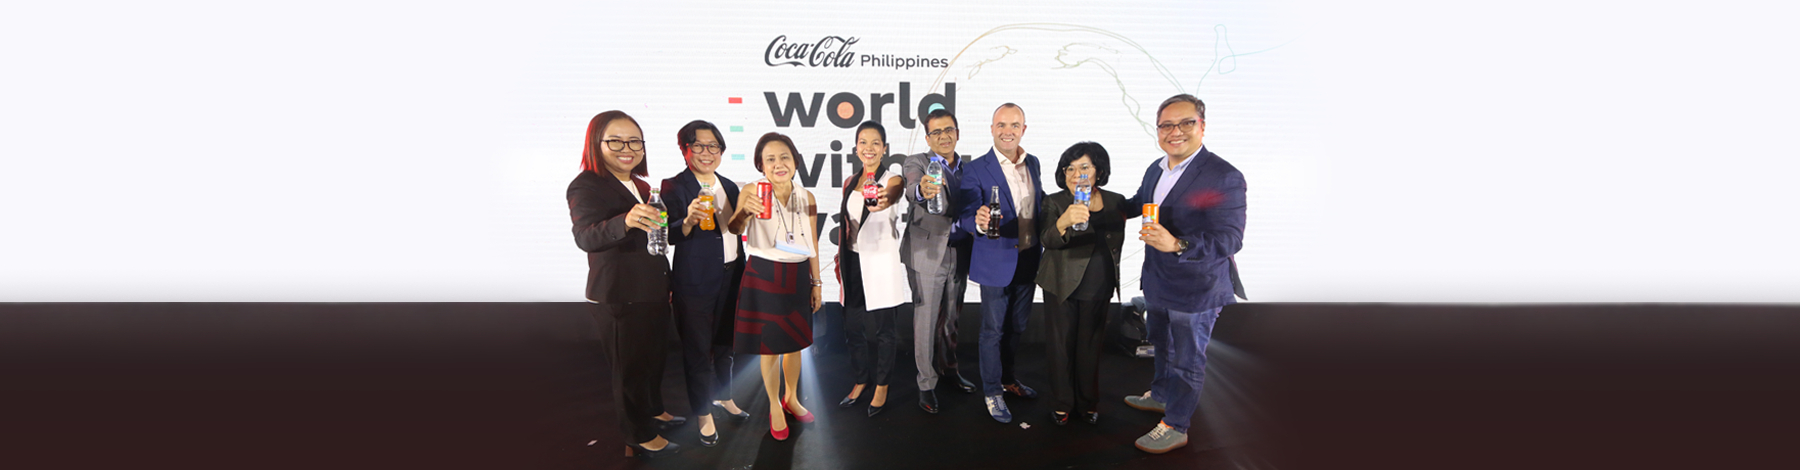 Group of people in suits holding Coca-Cola products in front of a Coca-Cola Philippines World Without Waste advertising